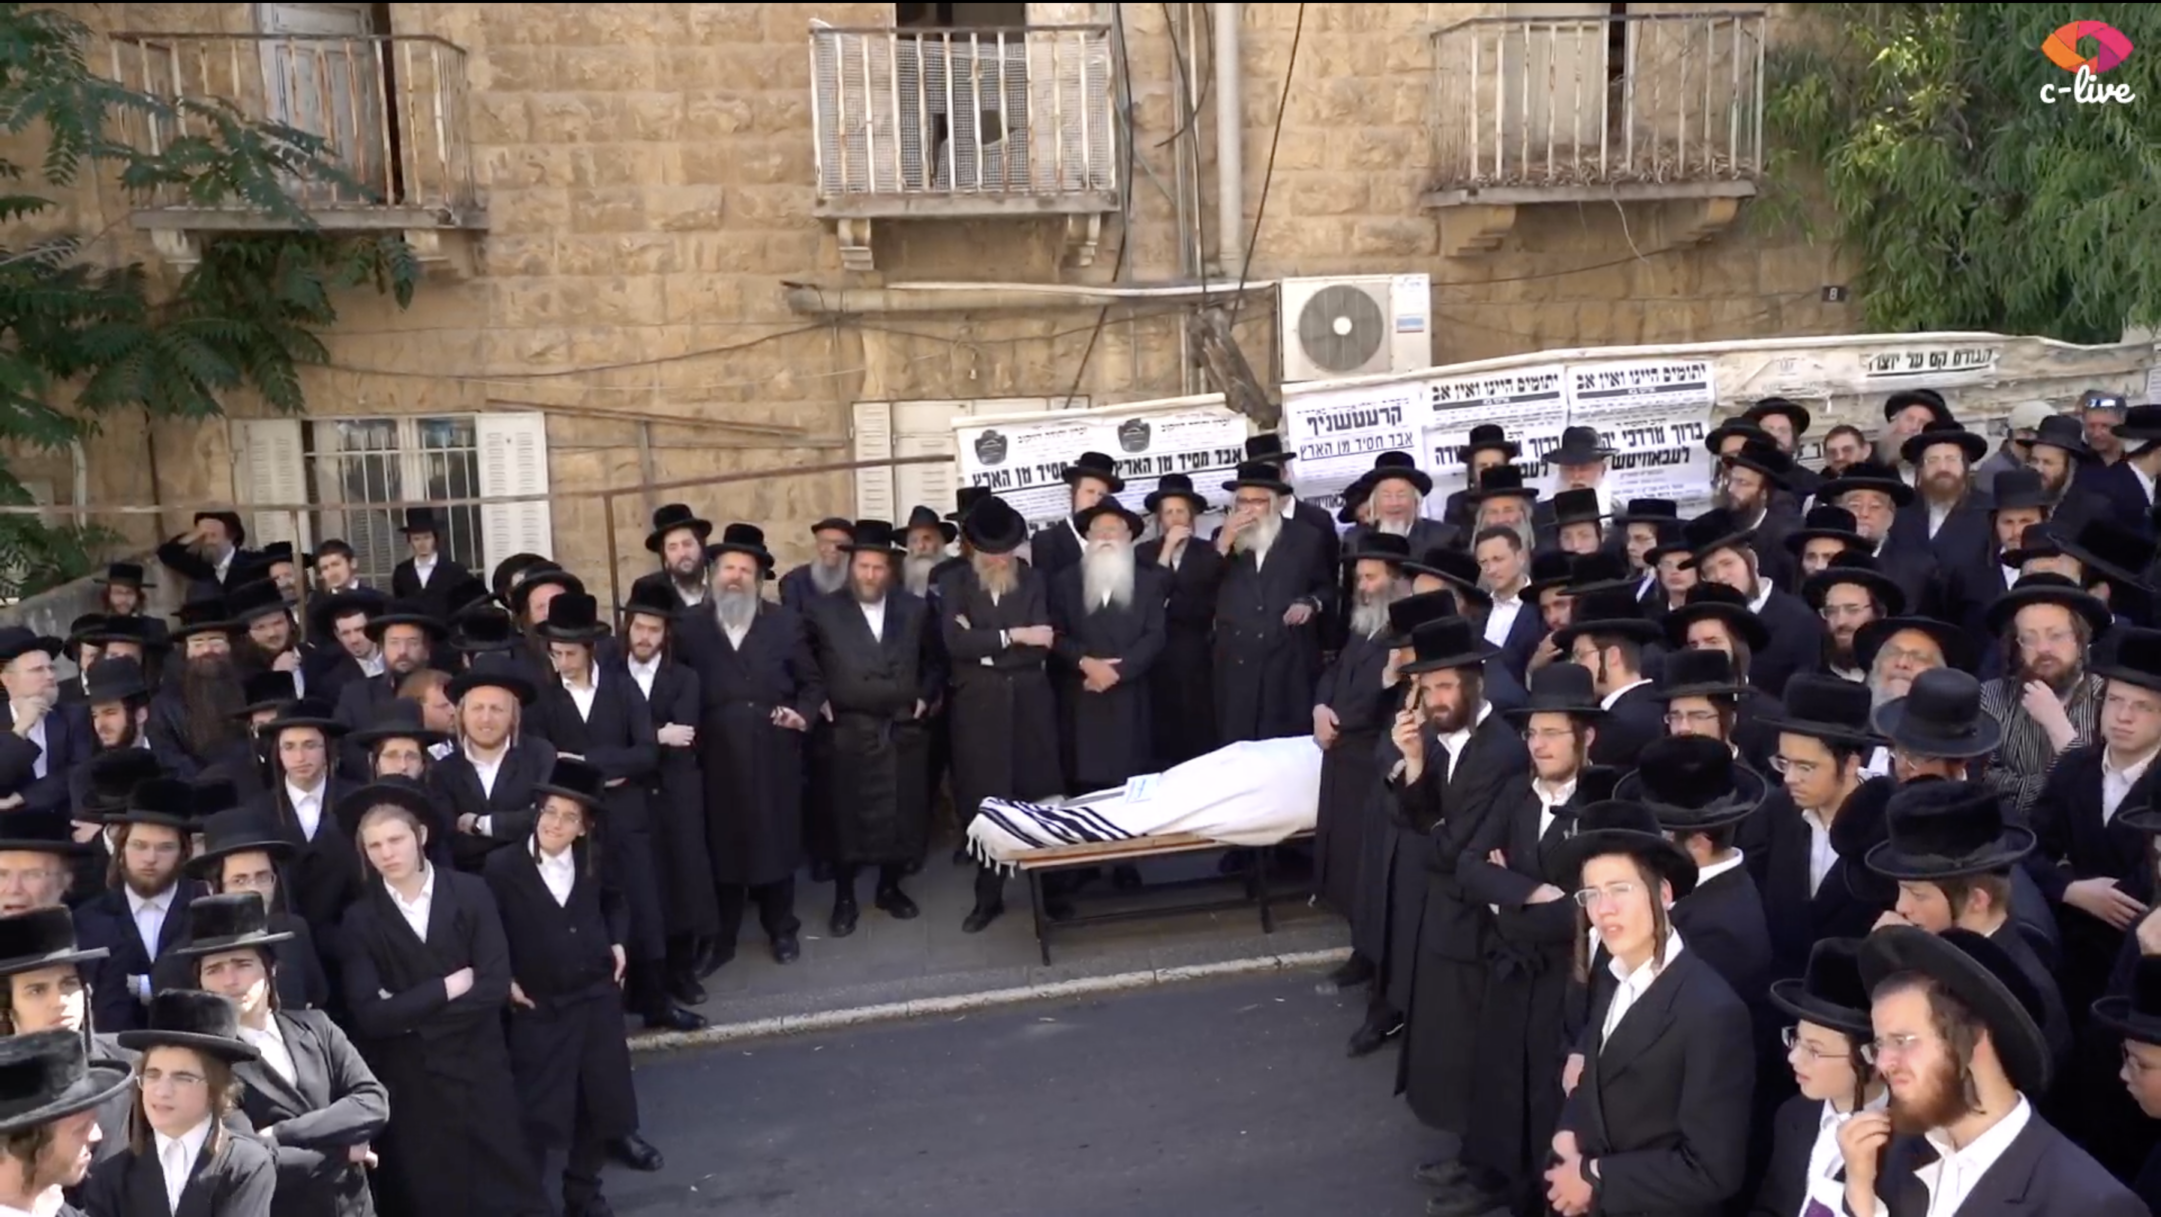 The body of Baruch Lebovits, a convicted child abuser, is visible at his funeral in Jerusalem, July 4, 2022. (Screenshot from livestream)